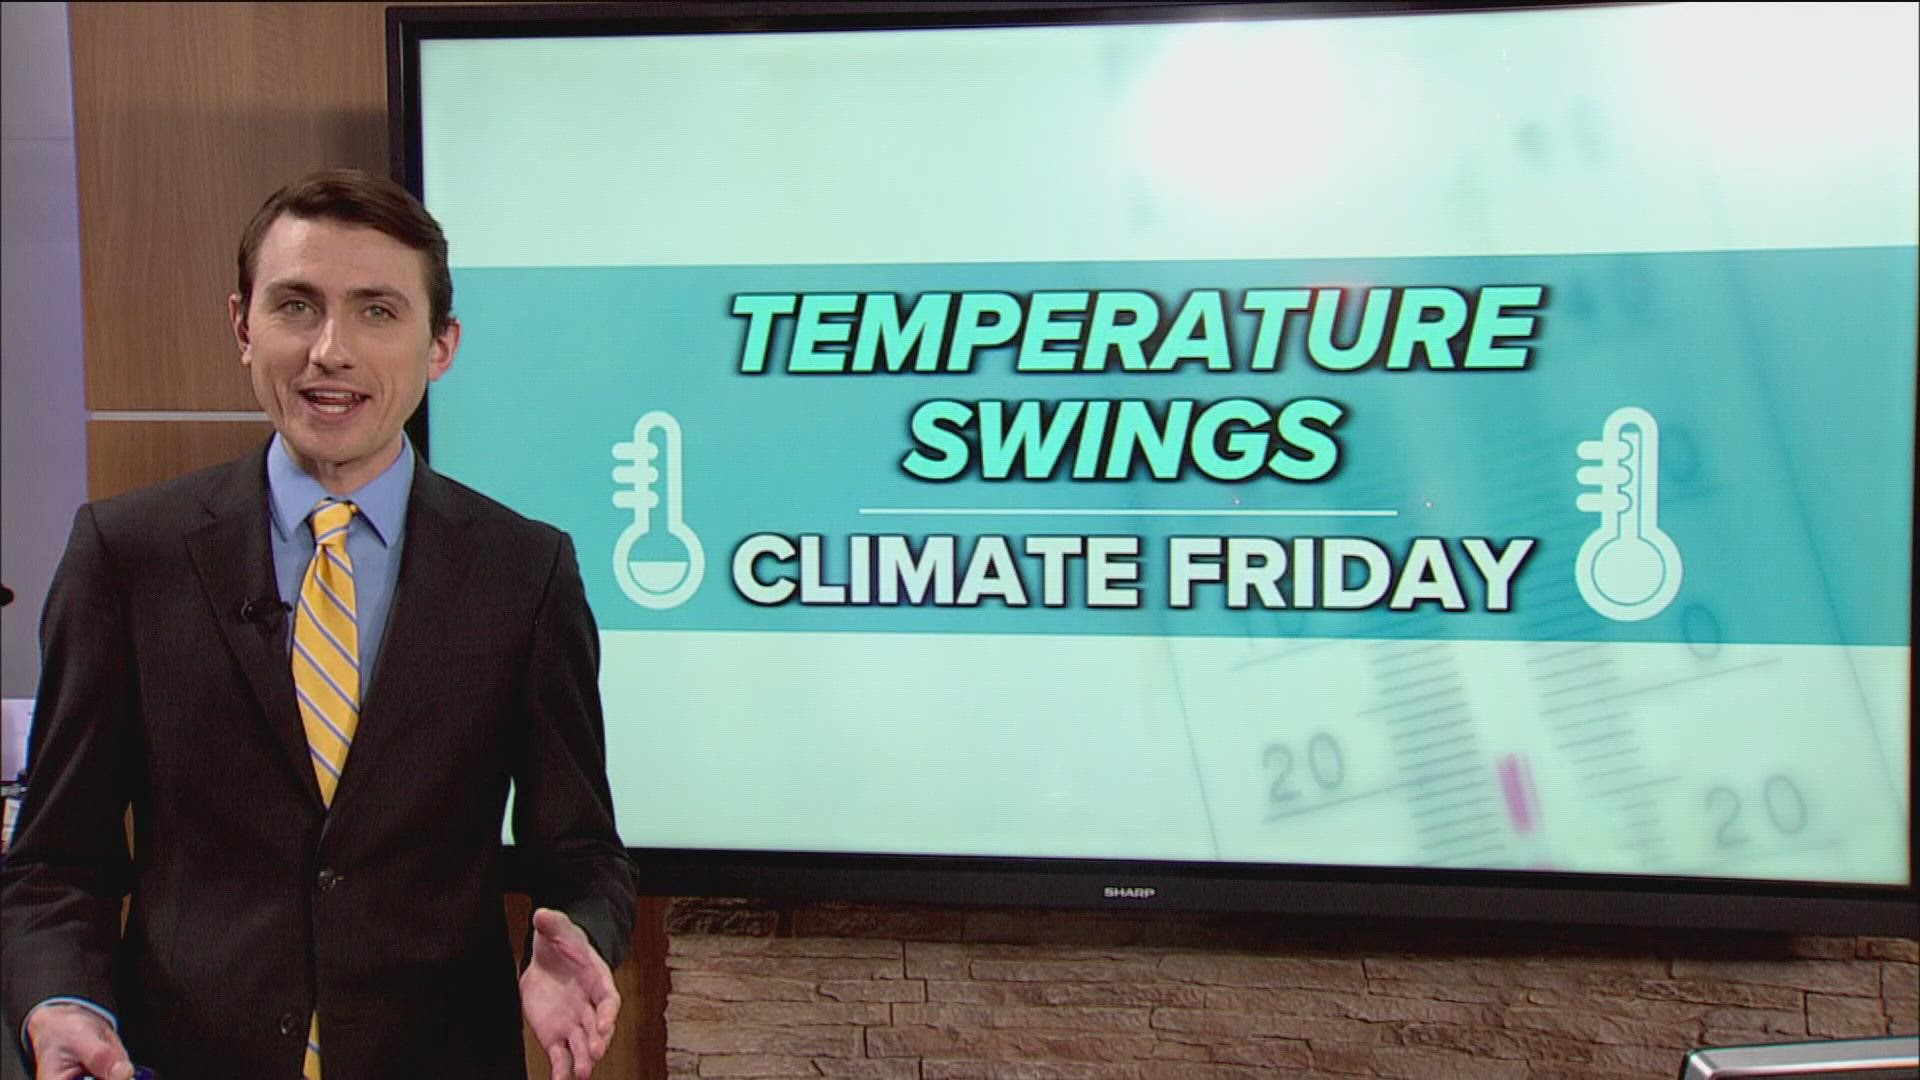 In this week's Climate Friday, WTOL 11 Meteorologist John Burchfield discusses the impact of climate change on temperatures and extreme swings.